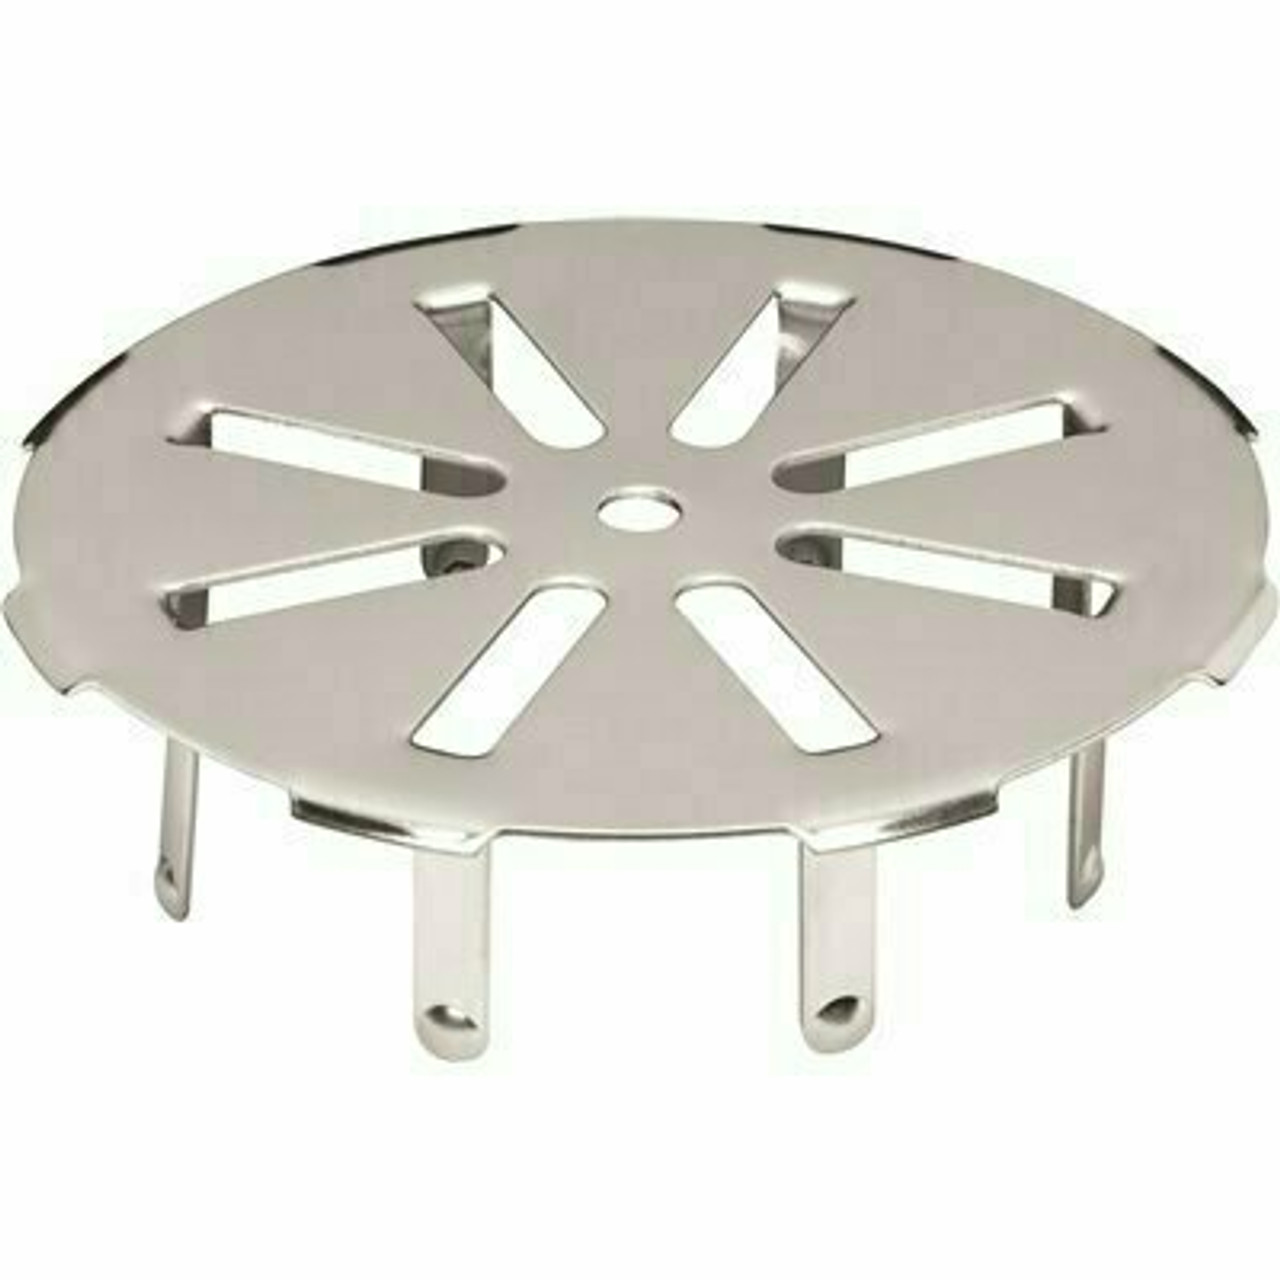 Oatey 4 In. Round Push-In Stainless Steel Shower Drain Cover